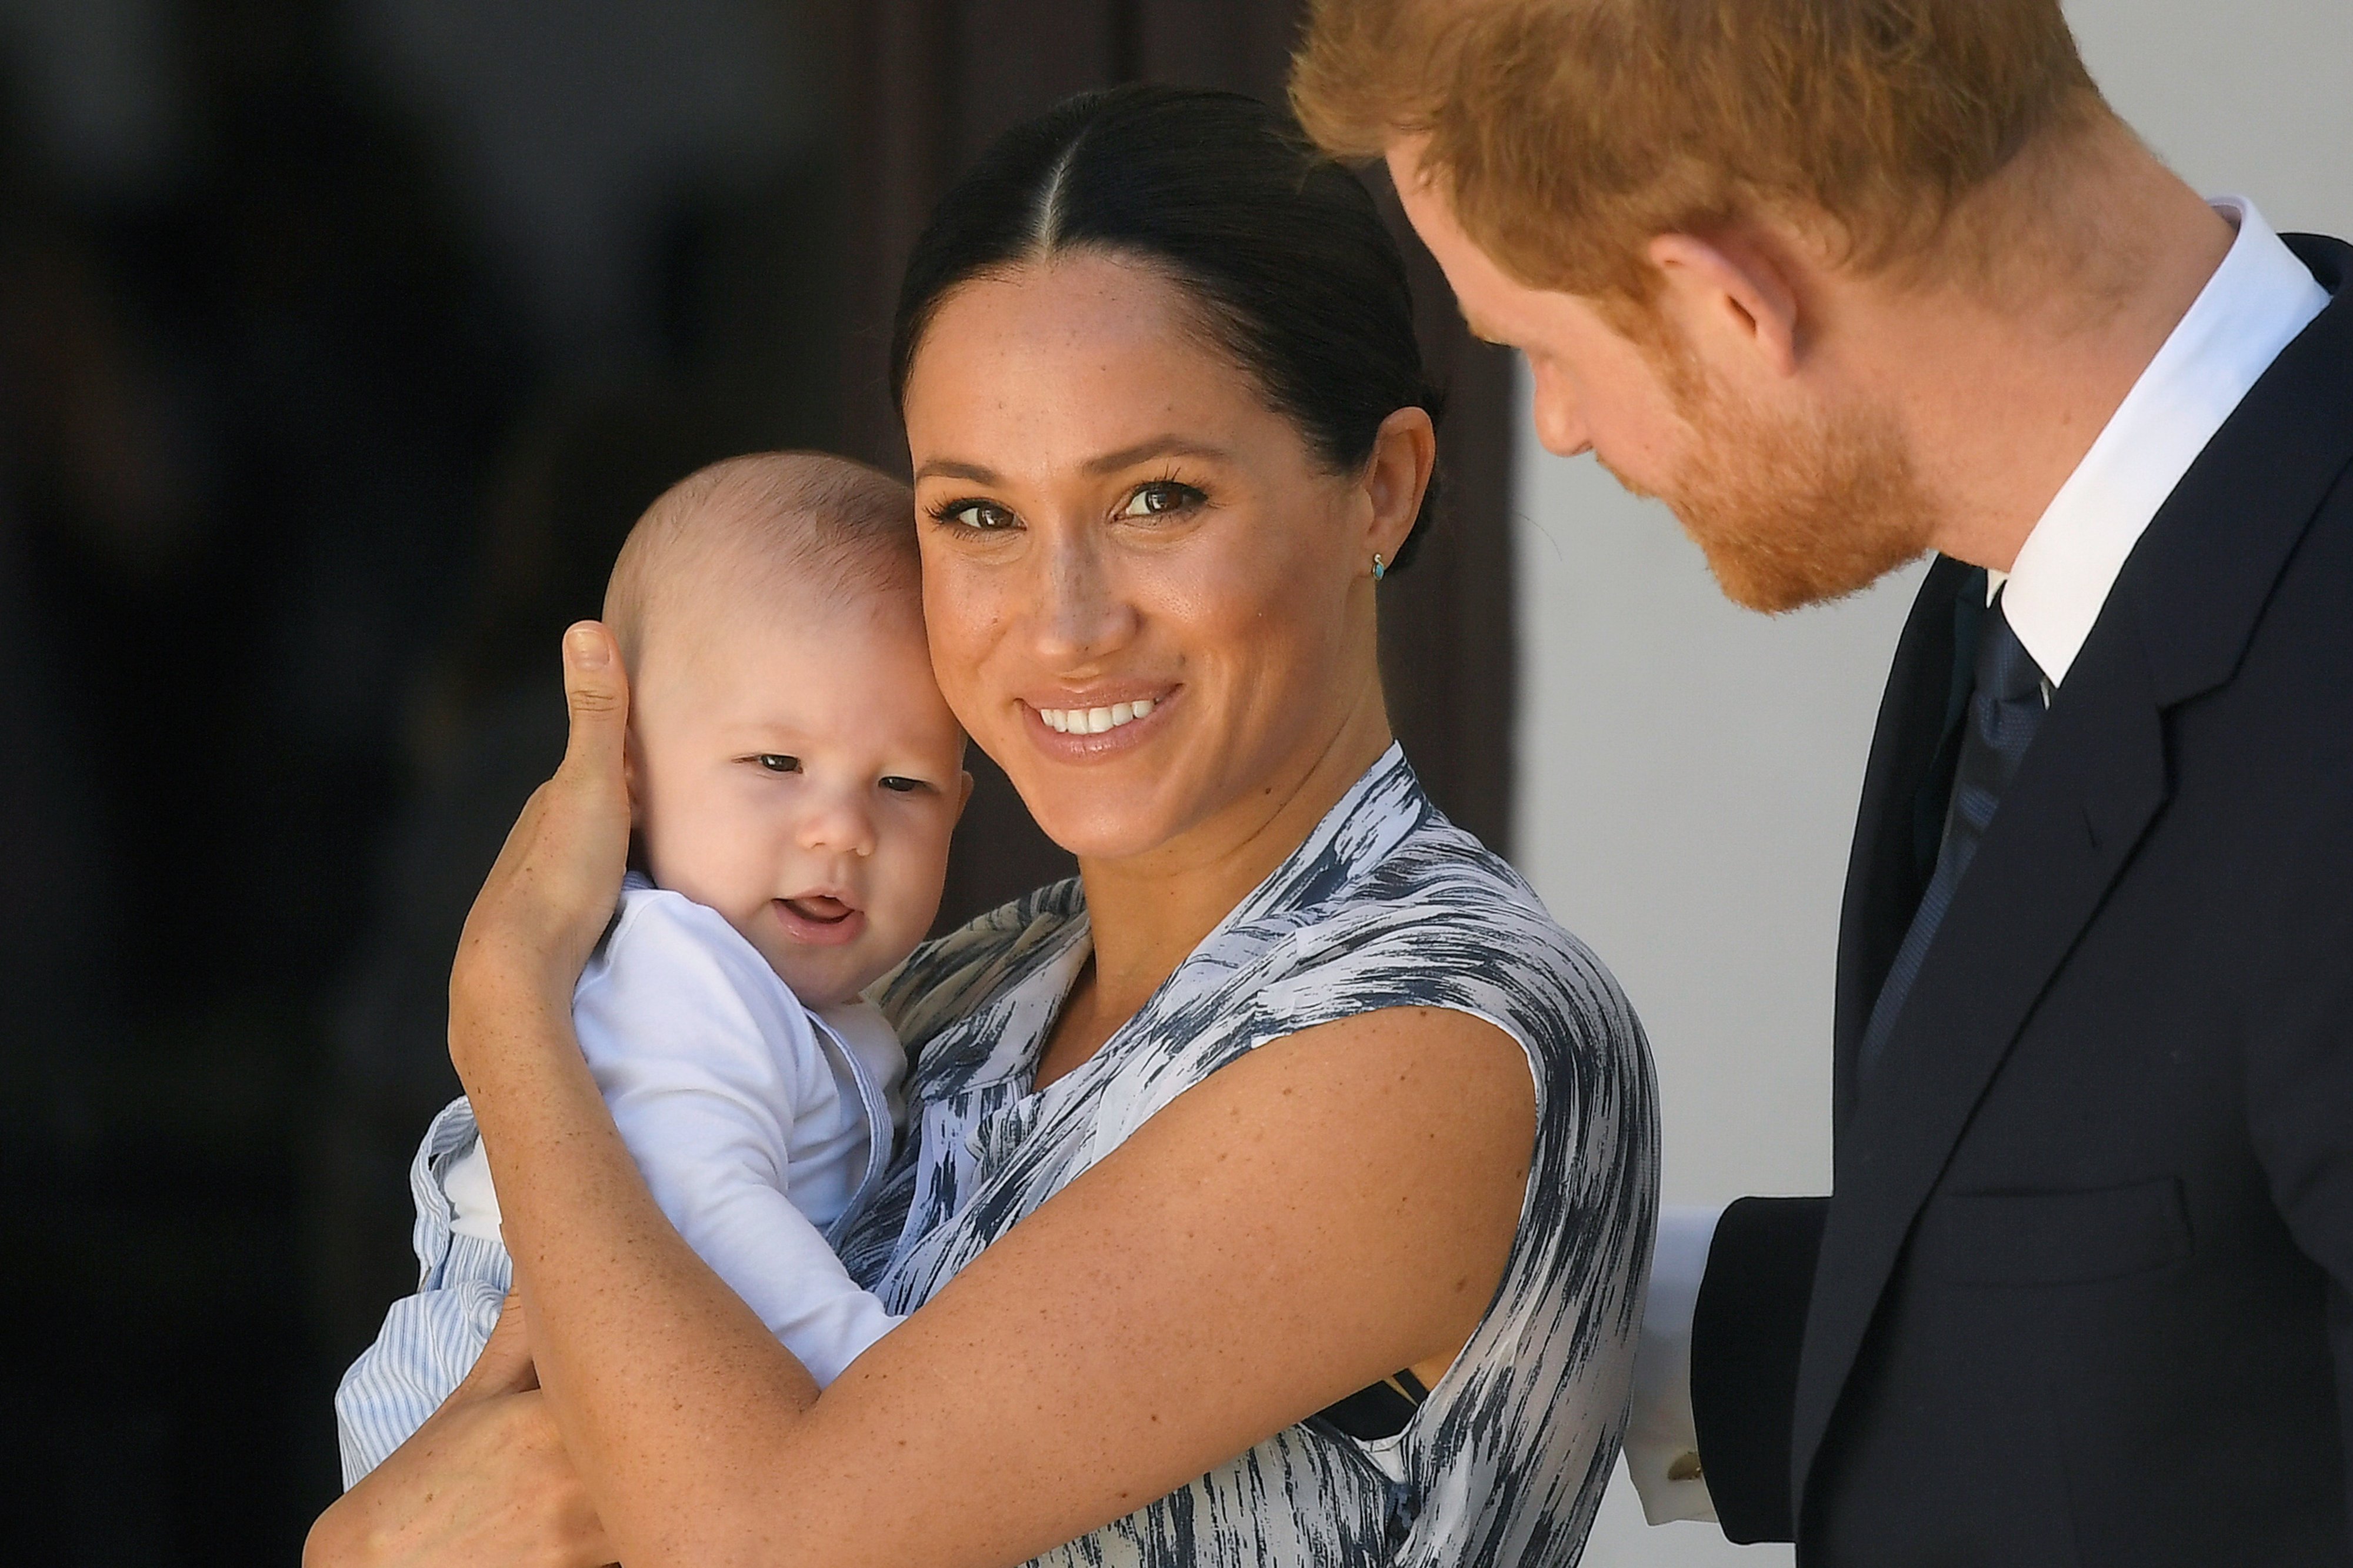 Prince Harry and Meghan Markle with their son Archie on September 25, 2019, in Cape Town, South Africa. | Photo: Getty Images.